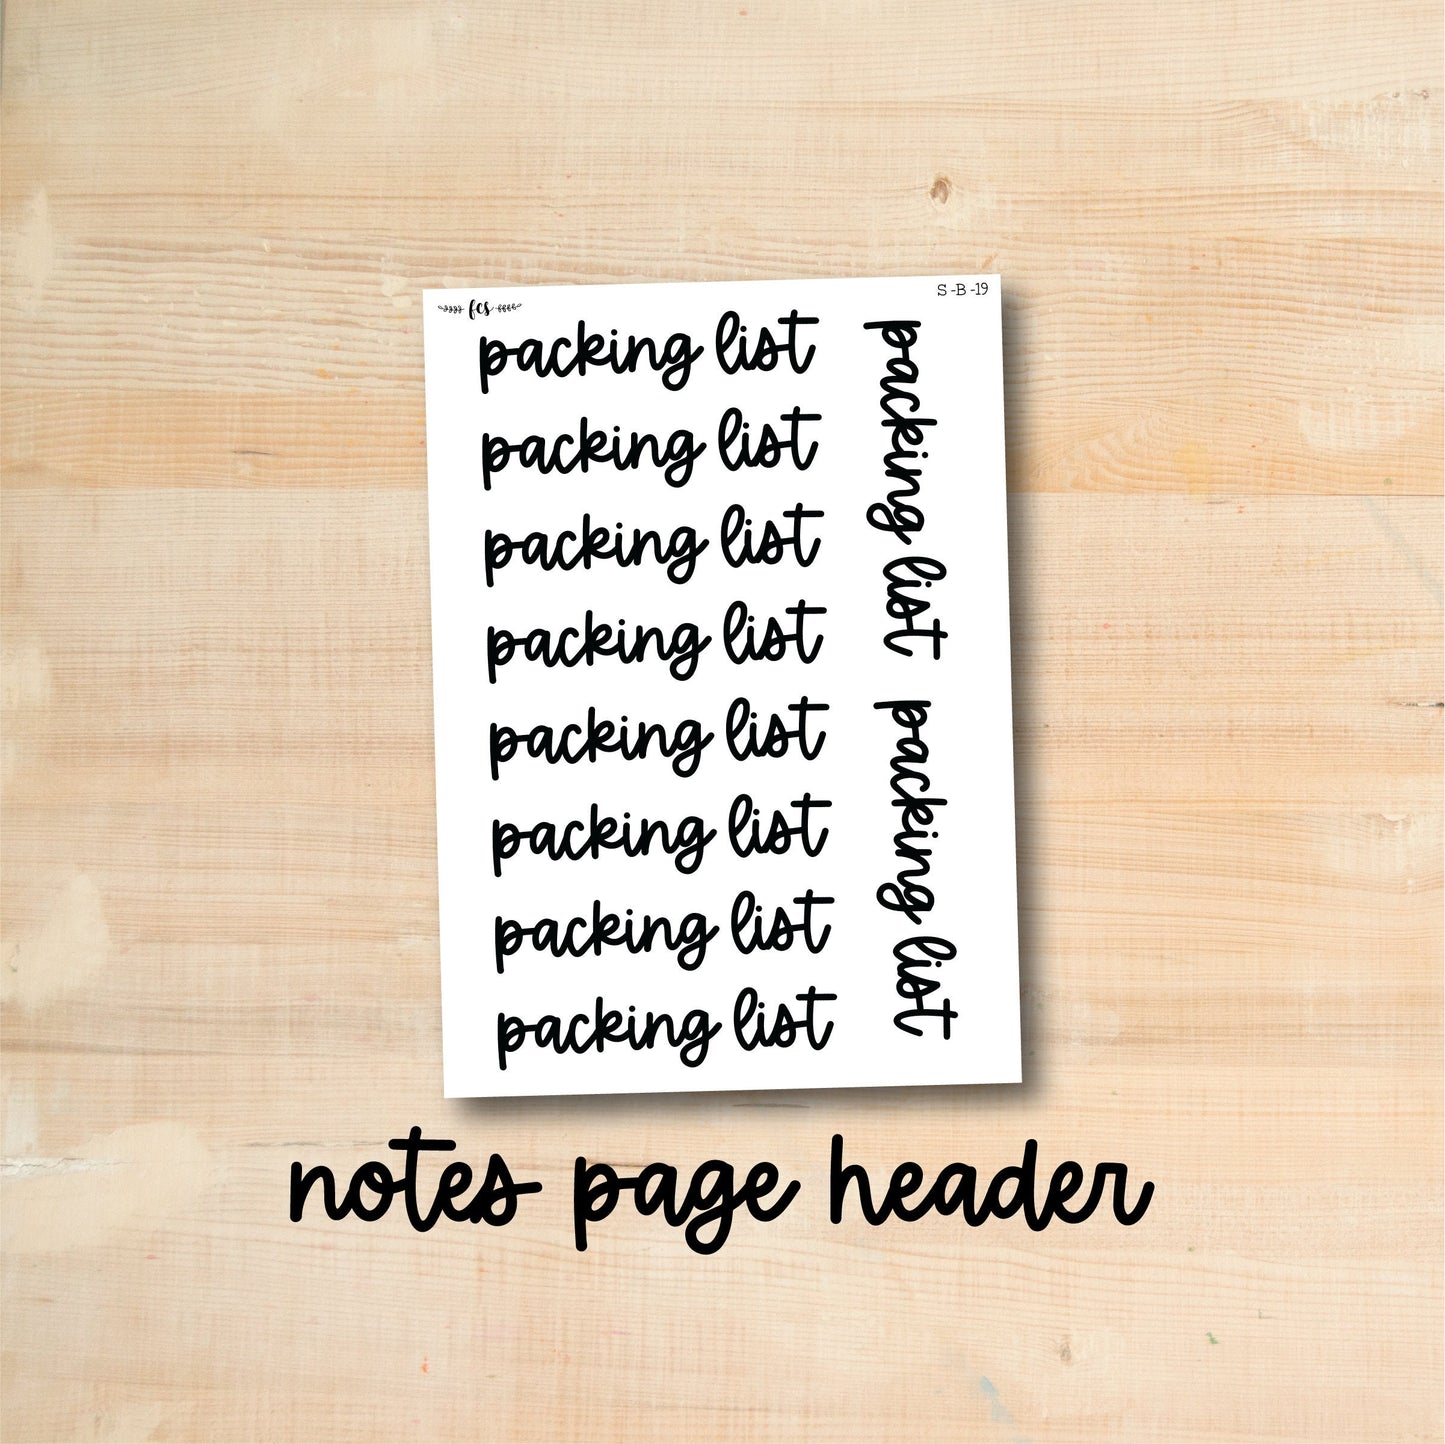 S-B-19 || PACKING LIST notes page header script stickers